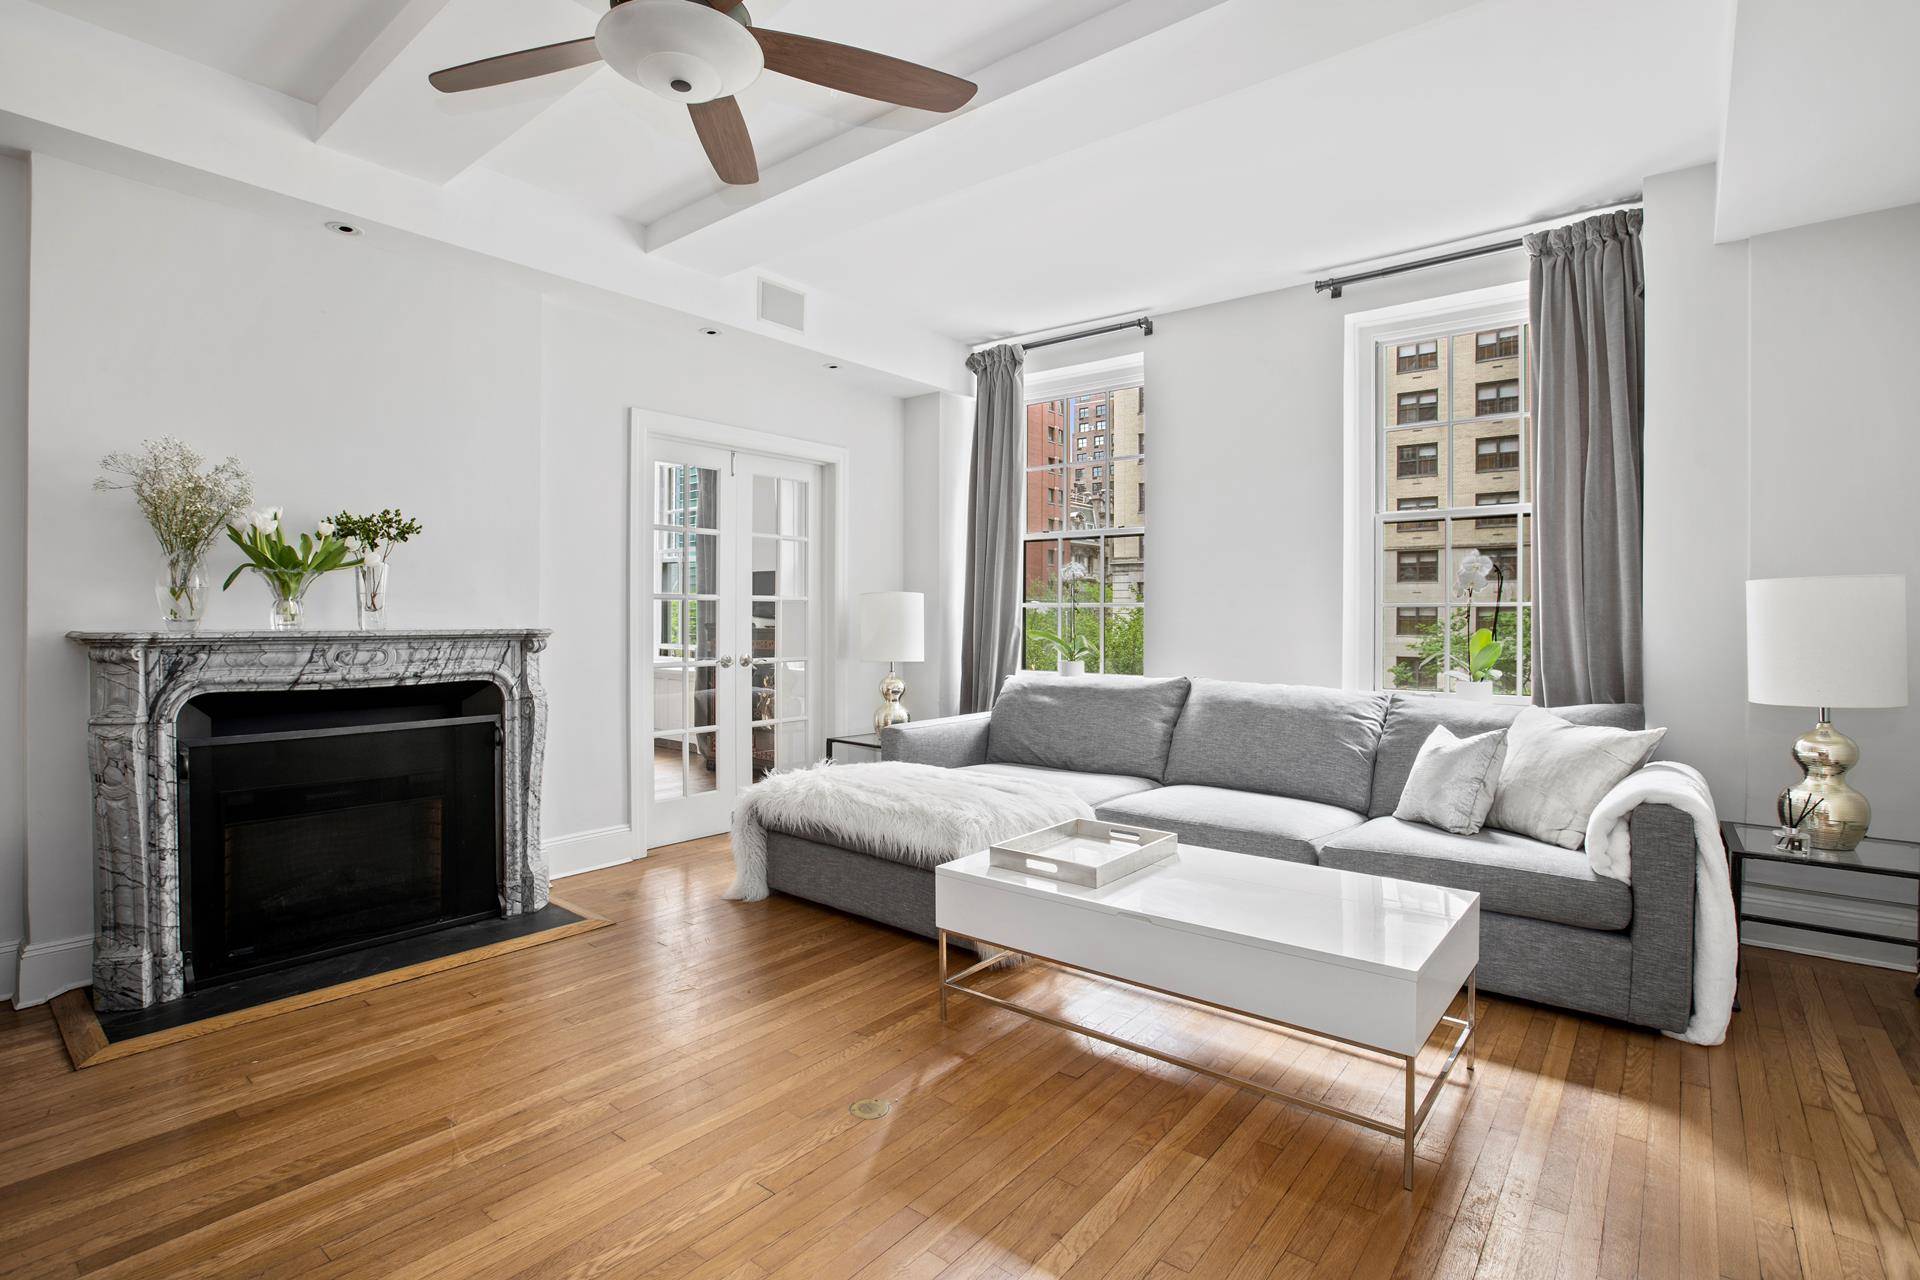 Wonderful ! One of a kind prewar Three Bedroom, Two Bath 24 Hour Doorman Condominium, located on a prime tree lined Park Avenue block in Murray Hill.